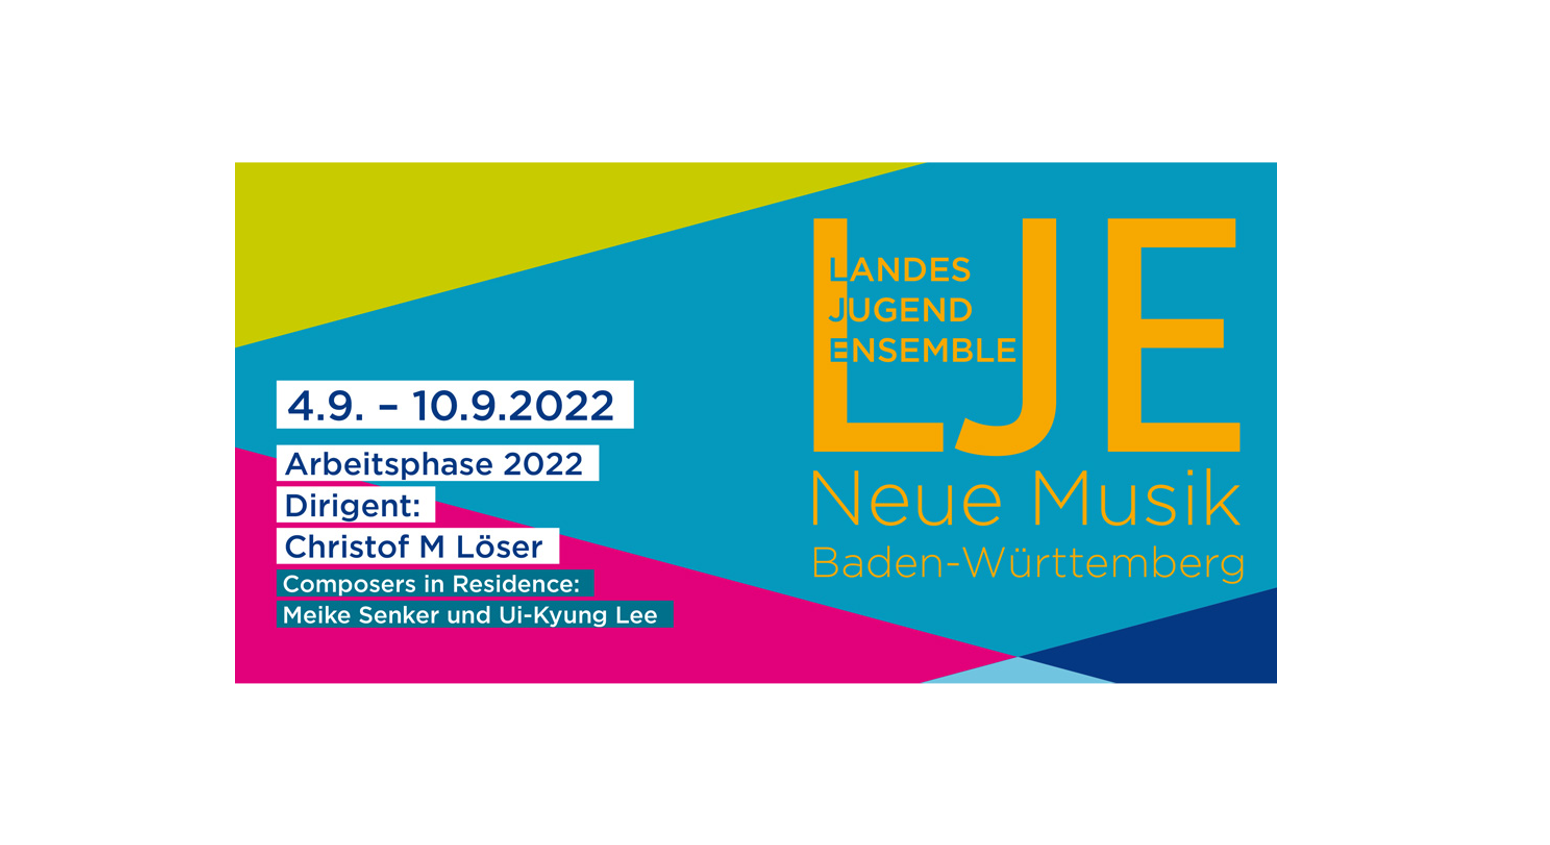 To see the flyer for the event of Landes Jugend Ensemble.